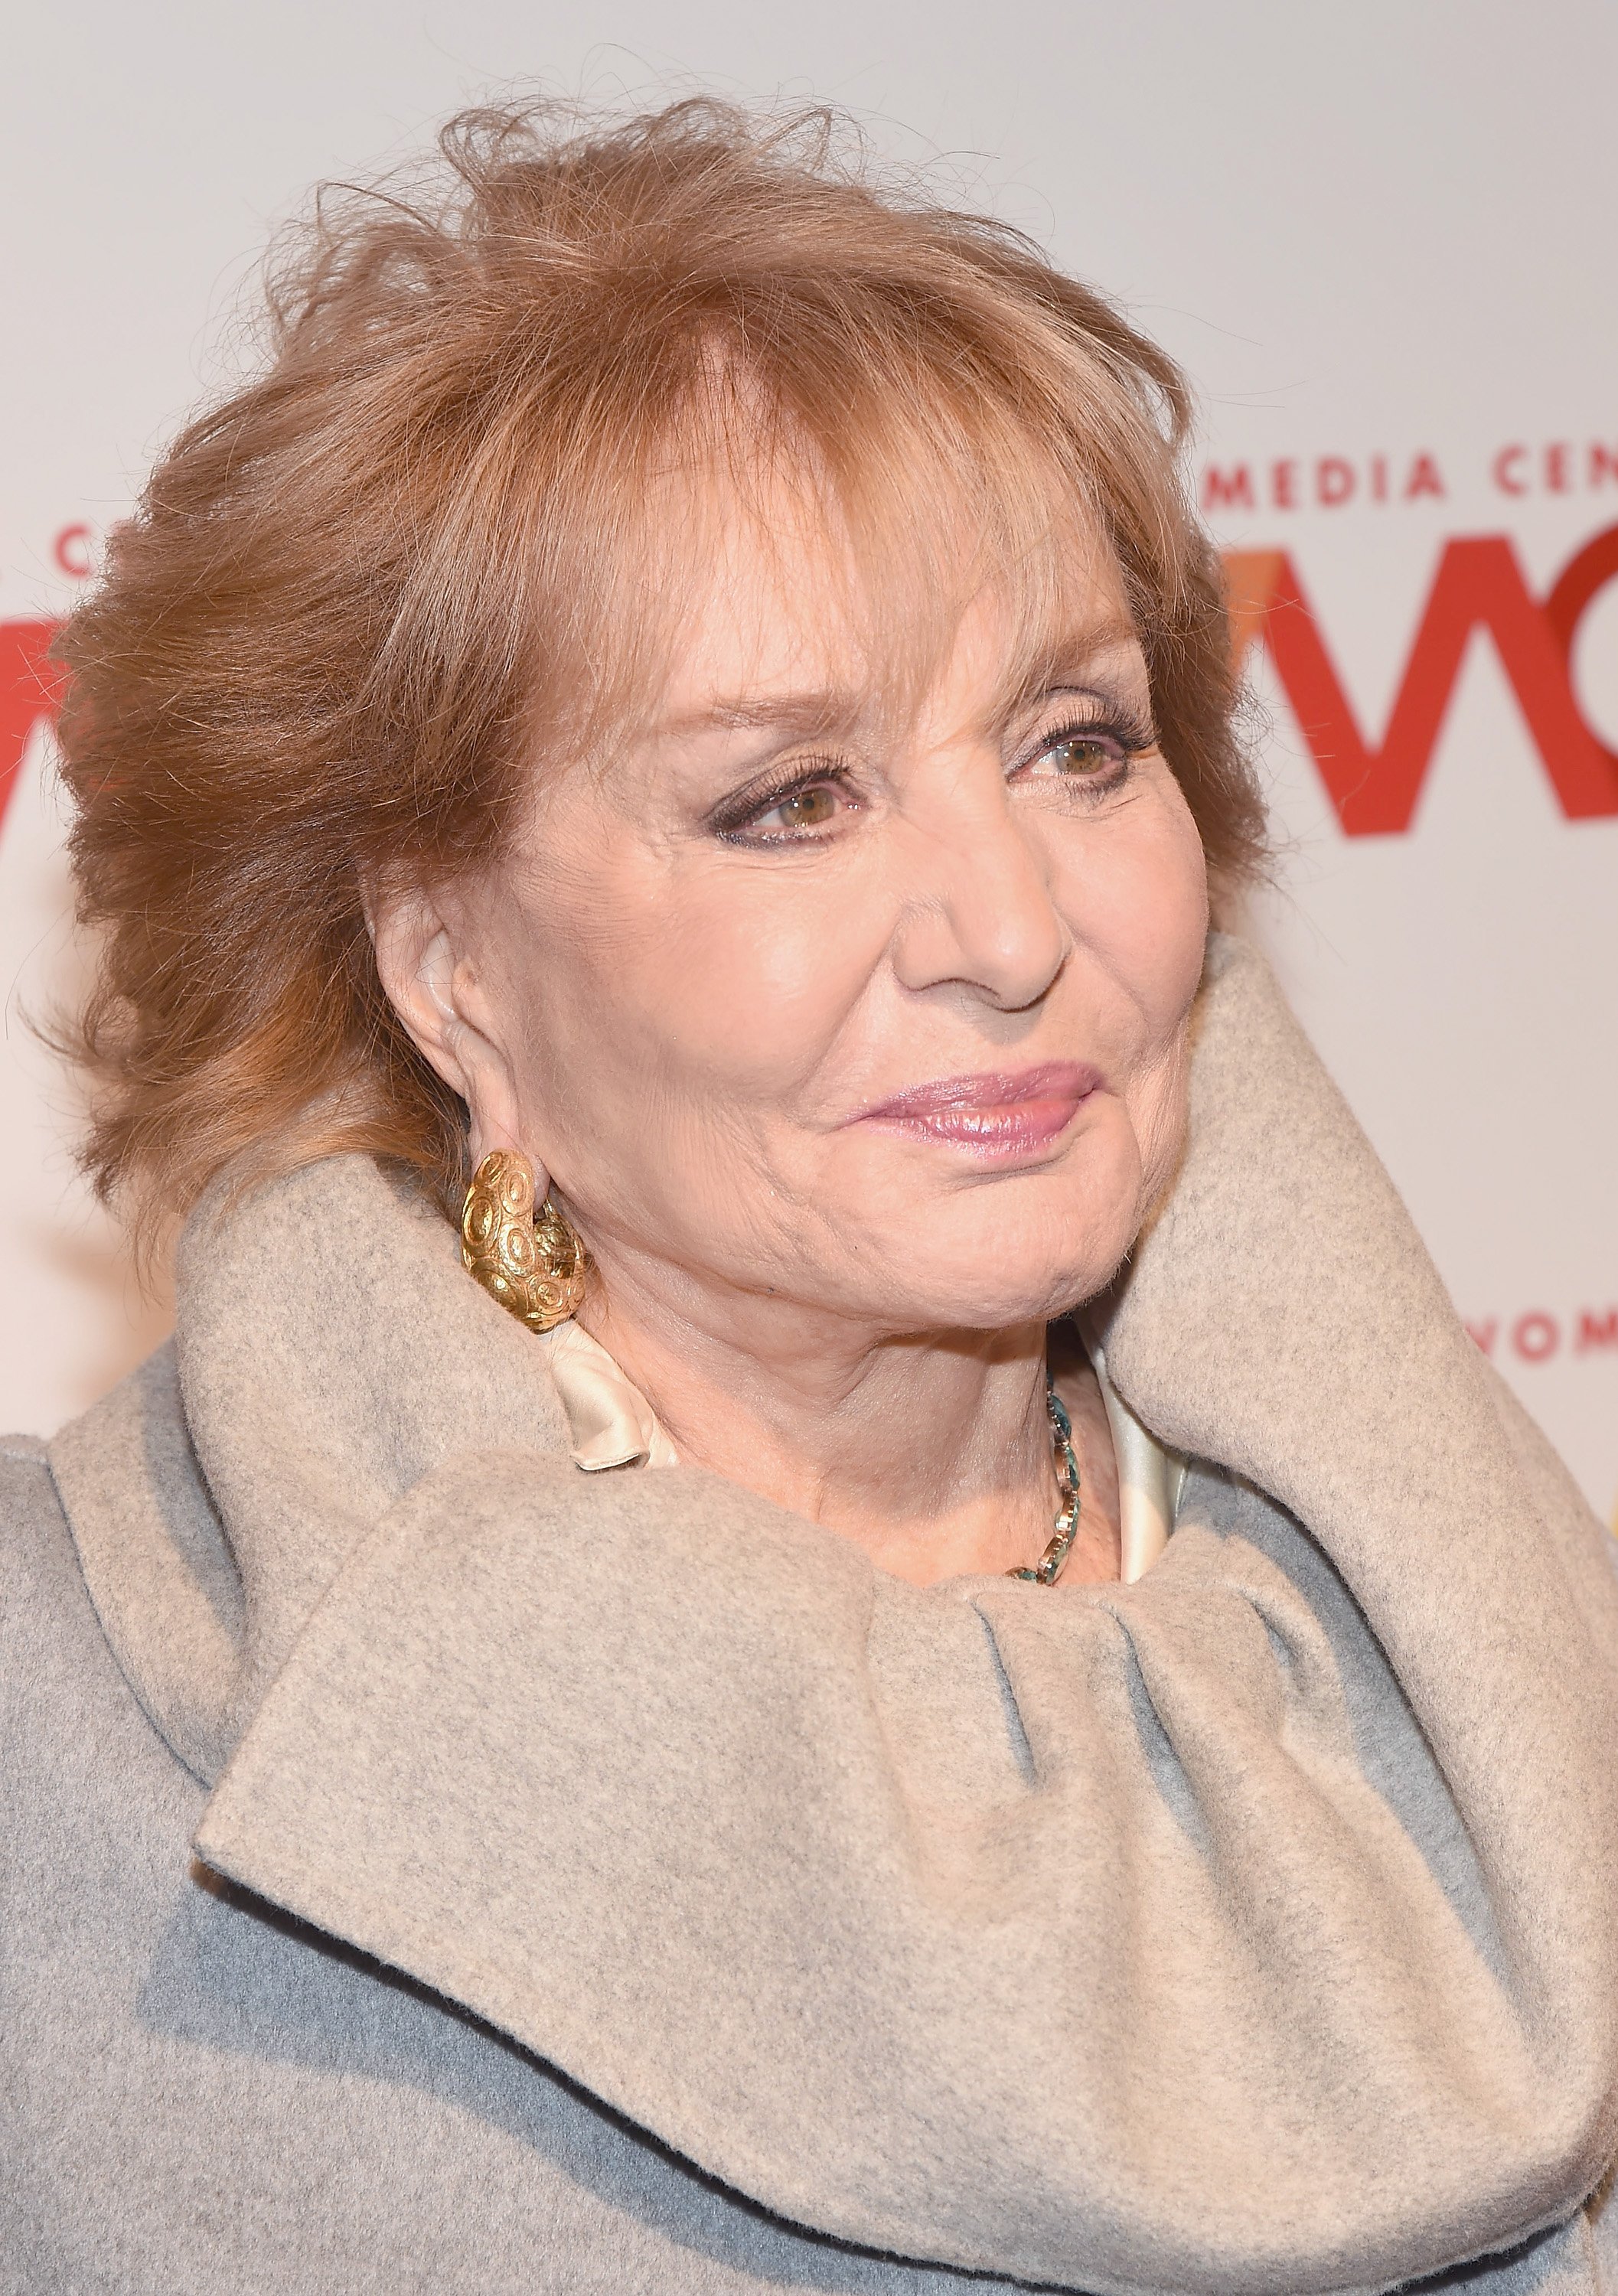 Barbara Walters during the 2014 Women's Media Awards at Capitale on October 29, 2014 in New York City. | Source: Getty Images